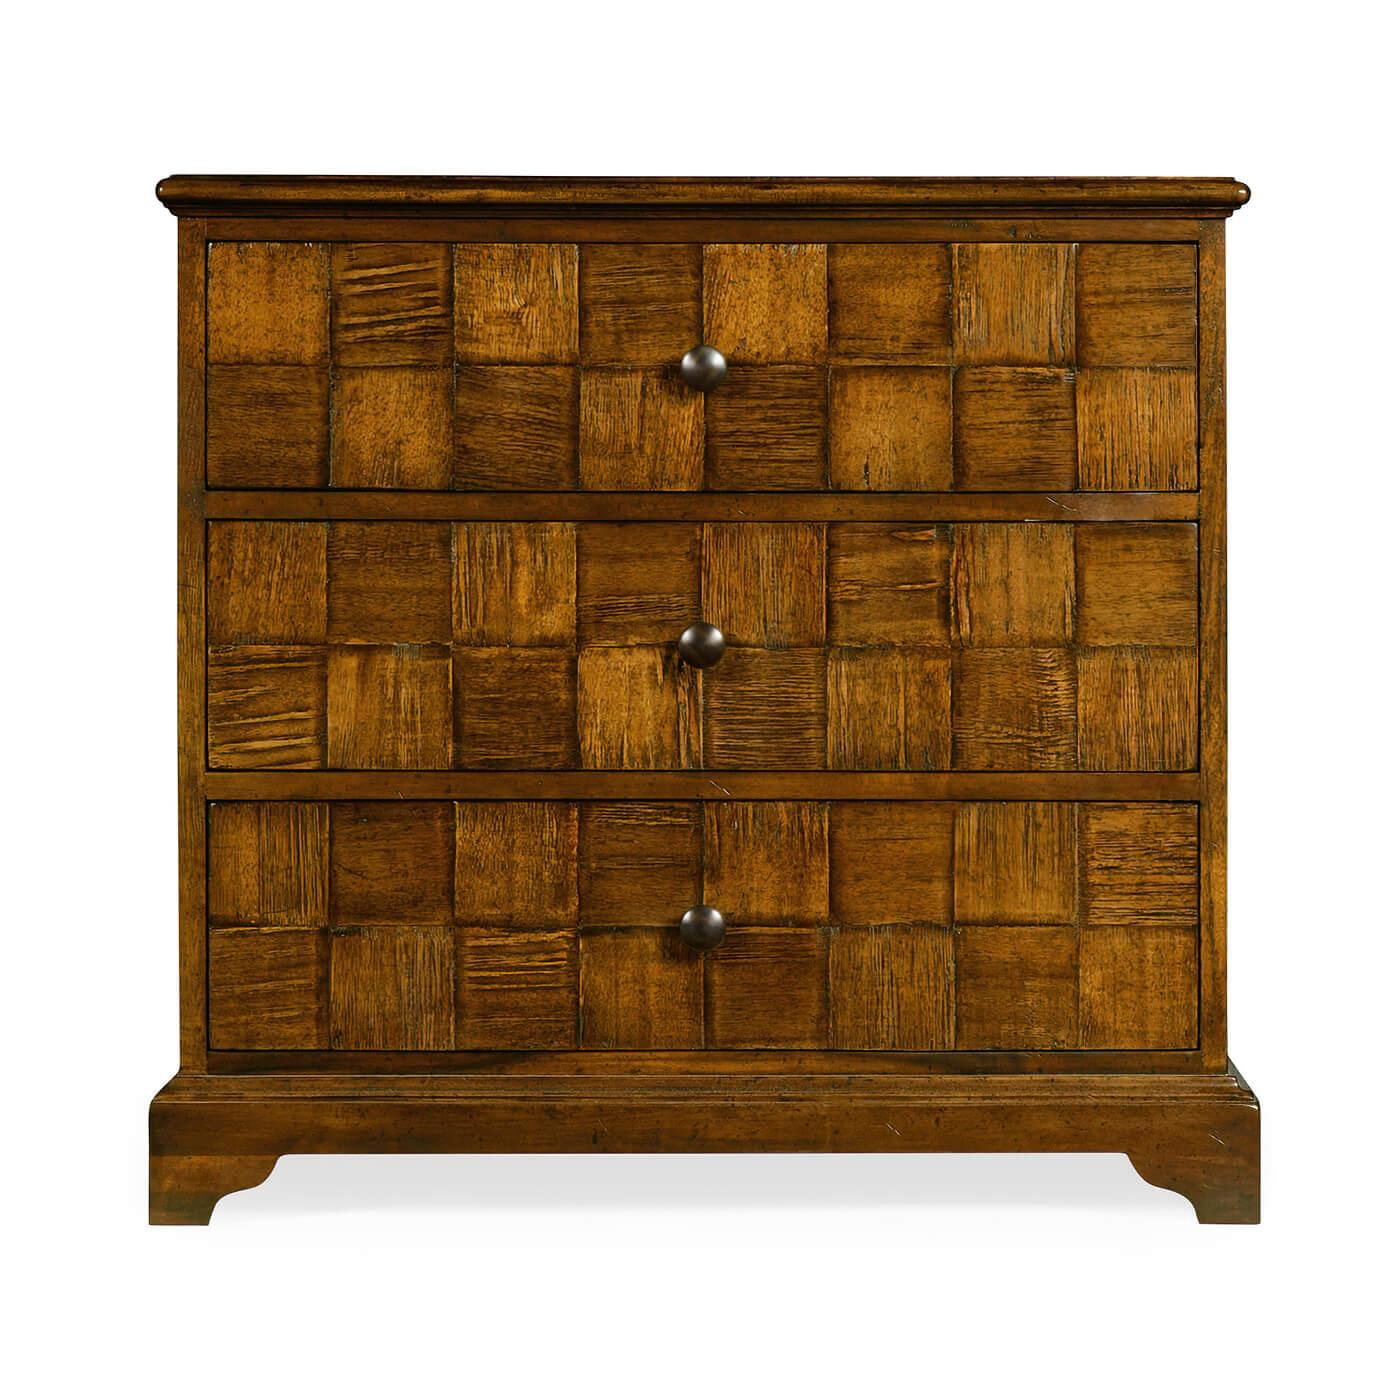 An English Georgian style rustic walnut finish three drawer chest of drawers with a molded edge top, crosshatched pattern drawer fronts on a stepped bracket foot base.

Dimensions: 31.75